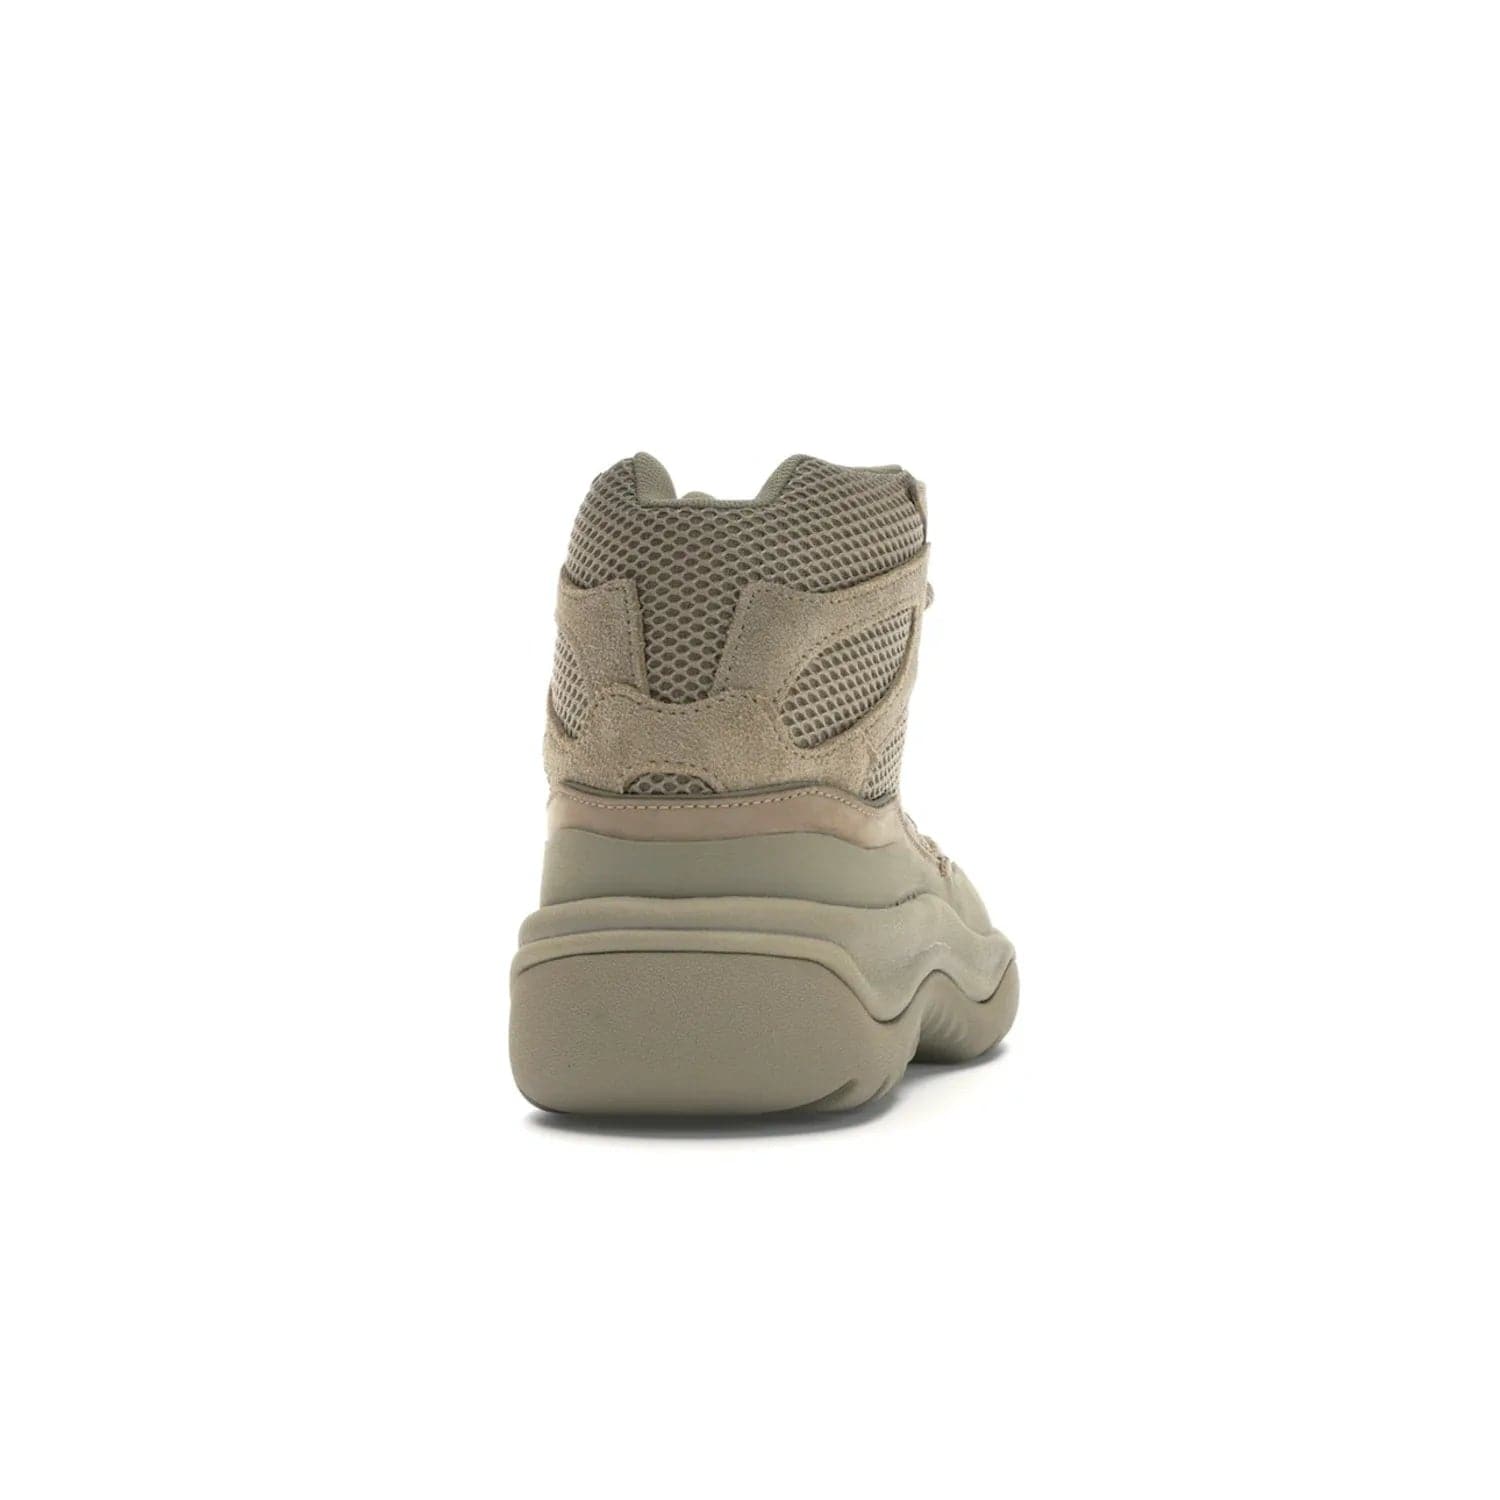 adidas Yeezy Desert Boot Rock - Image 29 - Only at www.BallersClubKickz.com - #
This season, make a fashion statement with the adidas Yeezy Desert Boot Rock. Nubuck and suede upper offers tonal style while the grooved sole provides traction and stability. Get yours in April 2019.